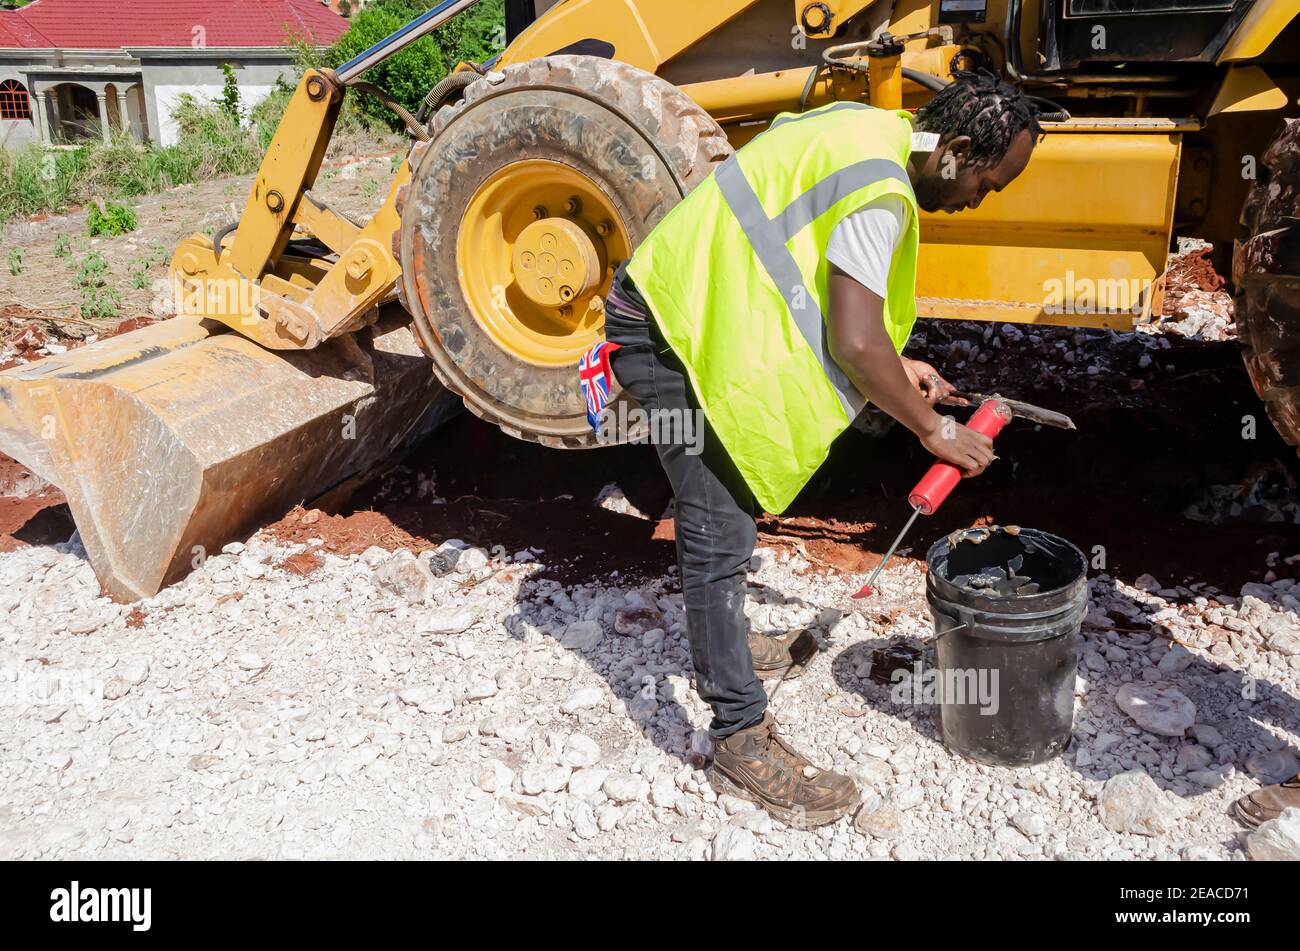 Equipment Operator Filling Grease Pump With Grease. Stock Photo